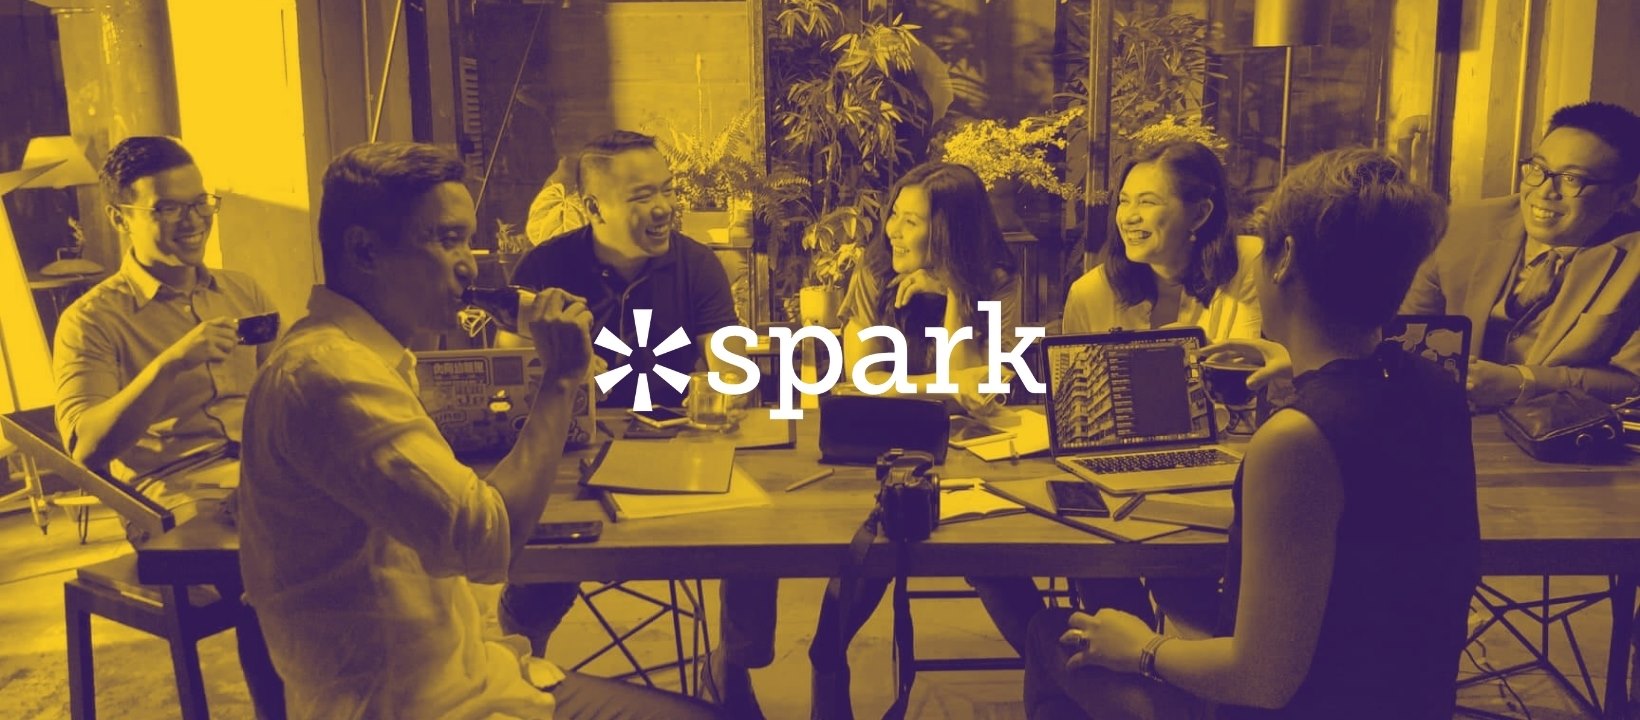 The Spark Project